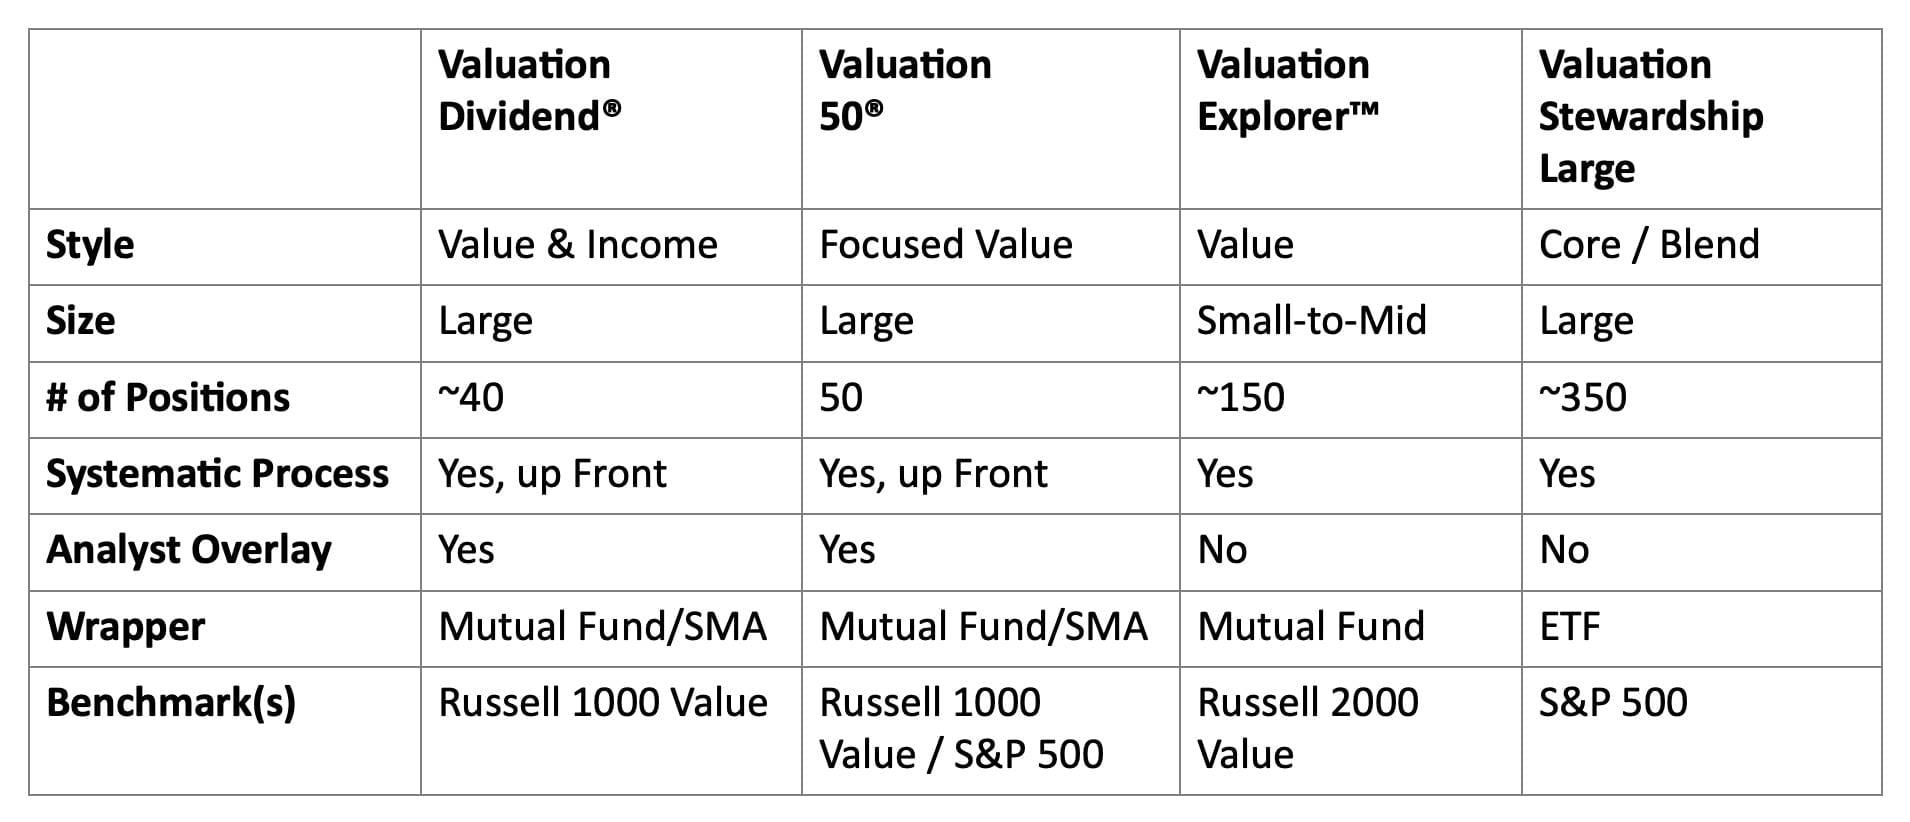 Applied Finance Valuation Dividend Valuation, 50 Valuation, Explorer Valuation and Stewardship Large 